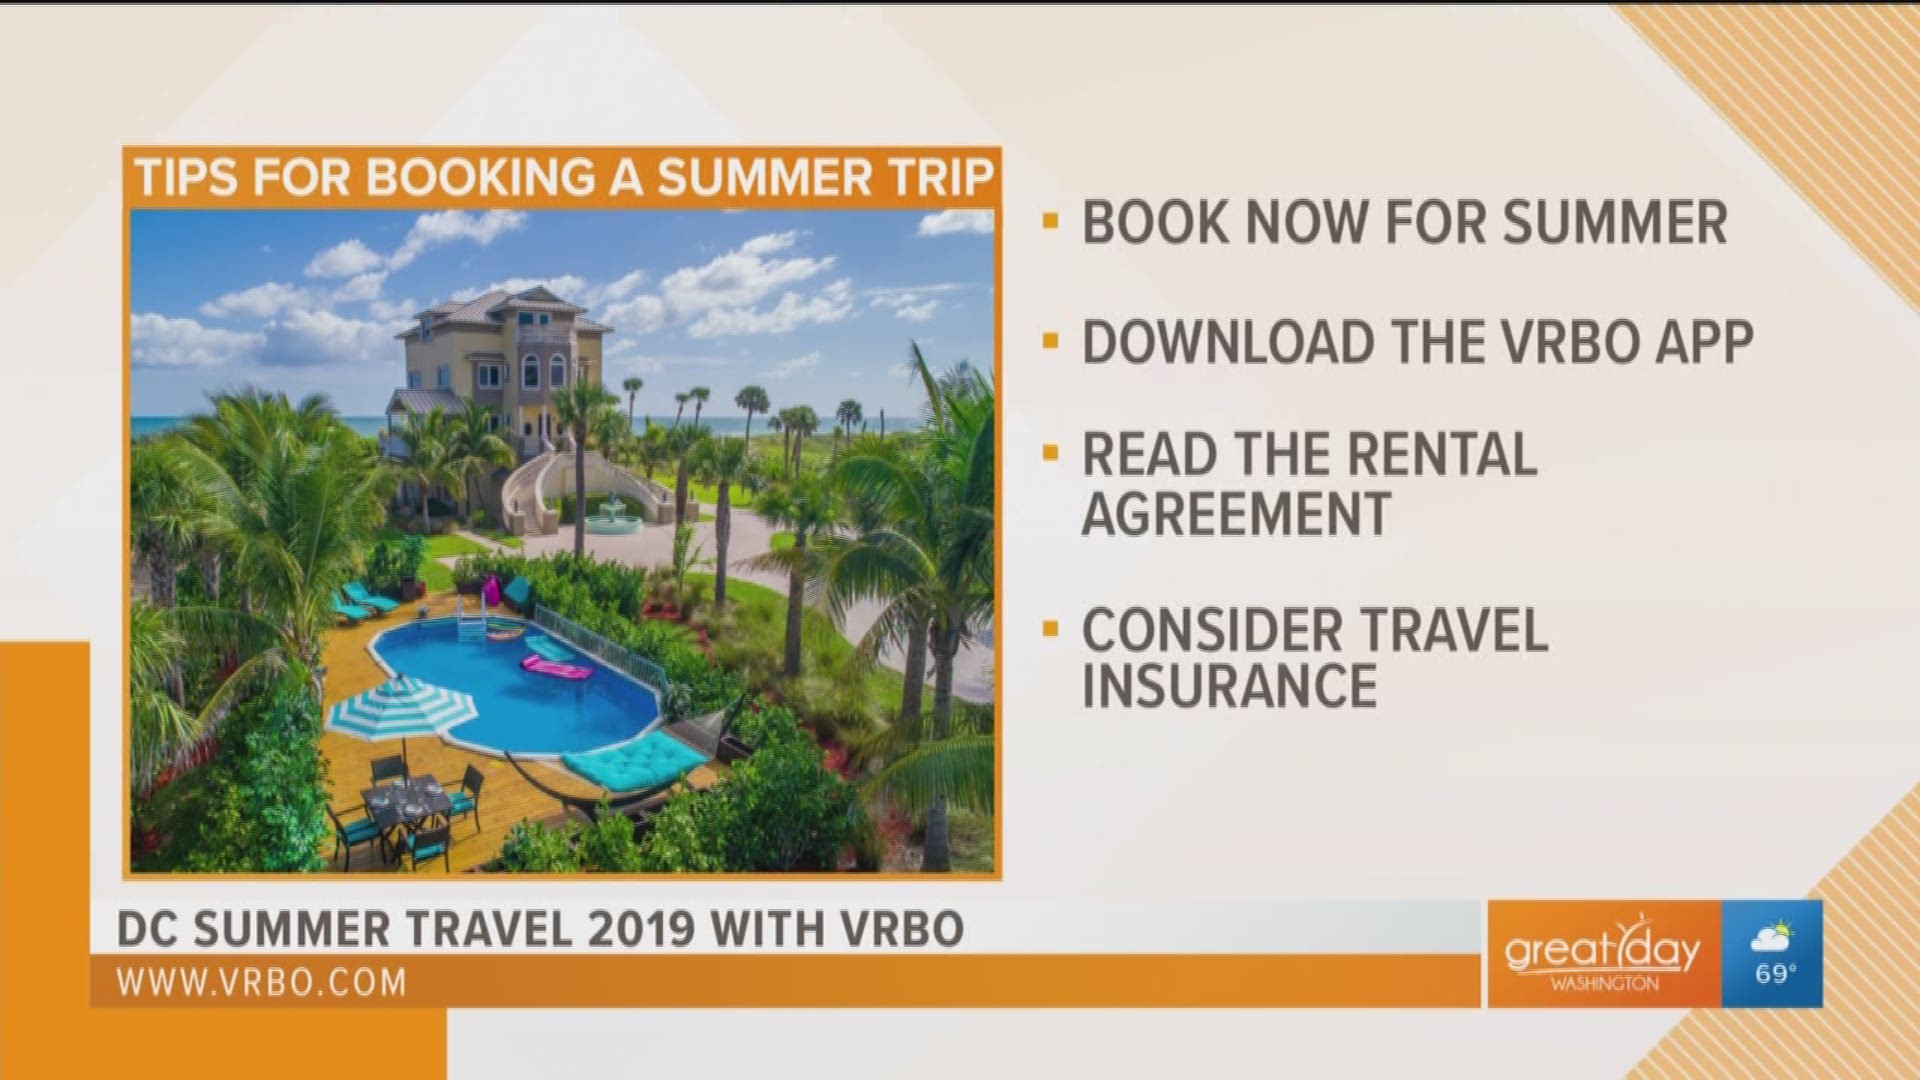 Summer vacation is just around the corner, but if you haven't made plans yet, it's certainly not too late.  Melanie Fish from Vrbo explains how you can use some new features on the Vrbo app that can ease trip planning with family or a group of friends.  Check out the Great Day Washington Trip Board at https://vrbo.io/GreatDayWashington